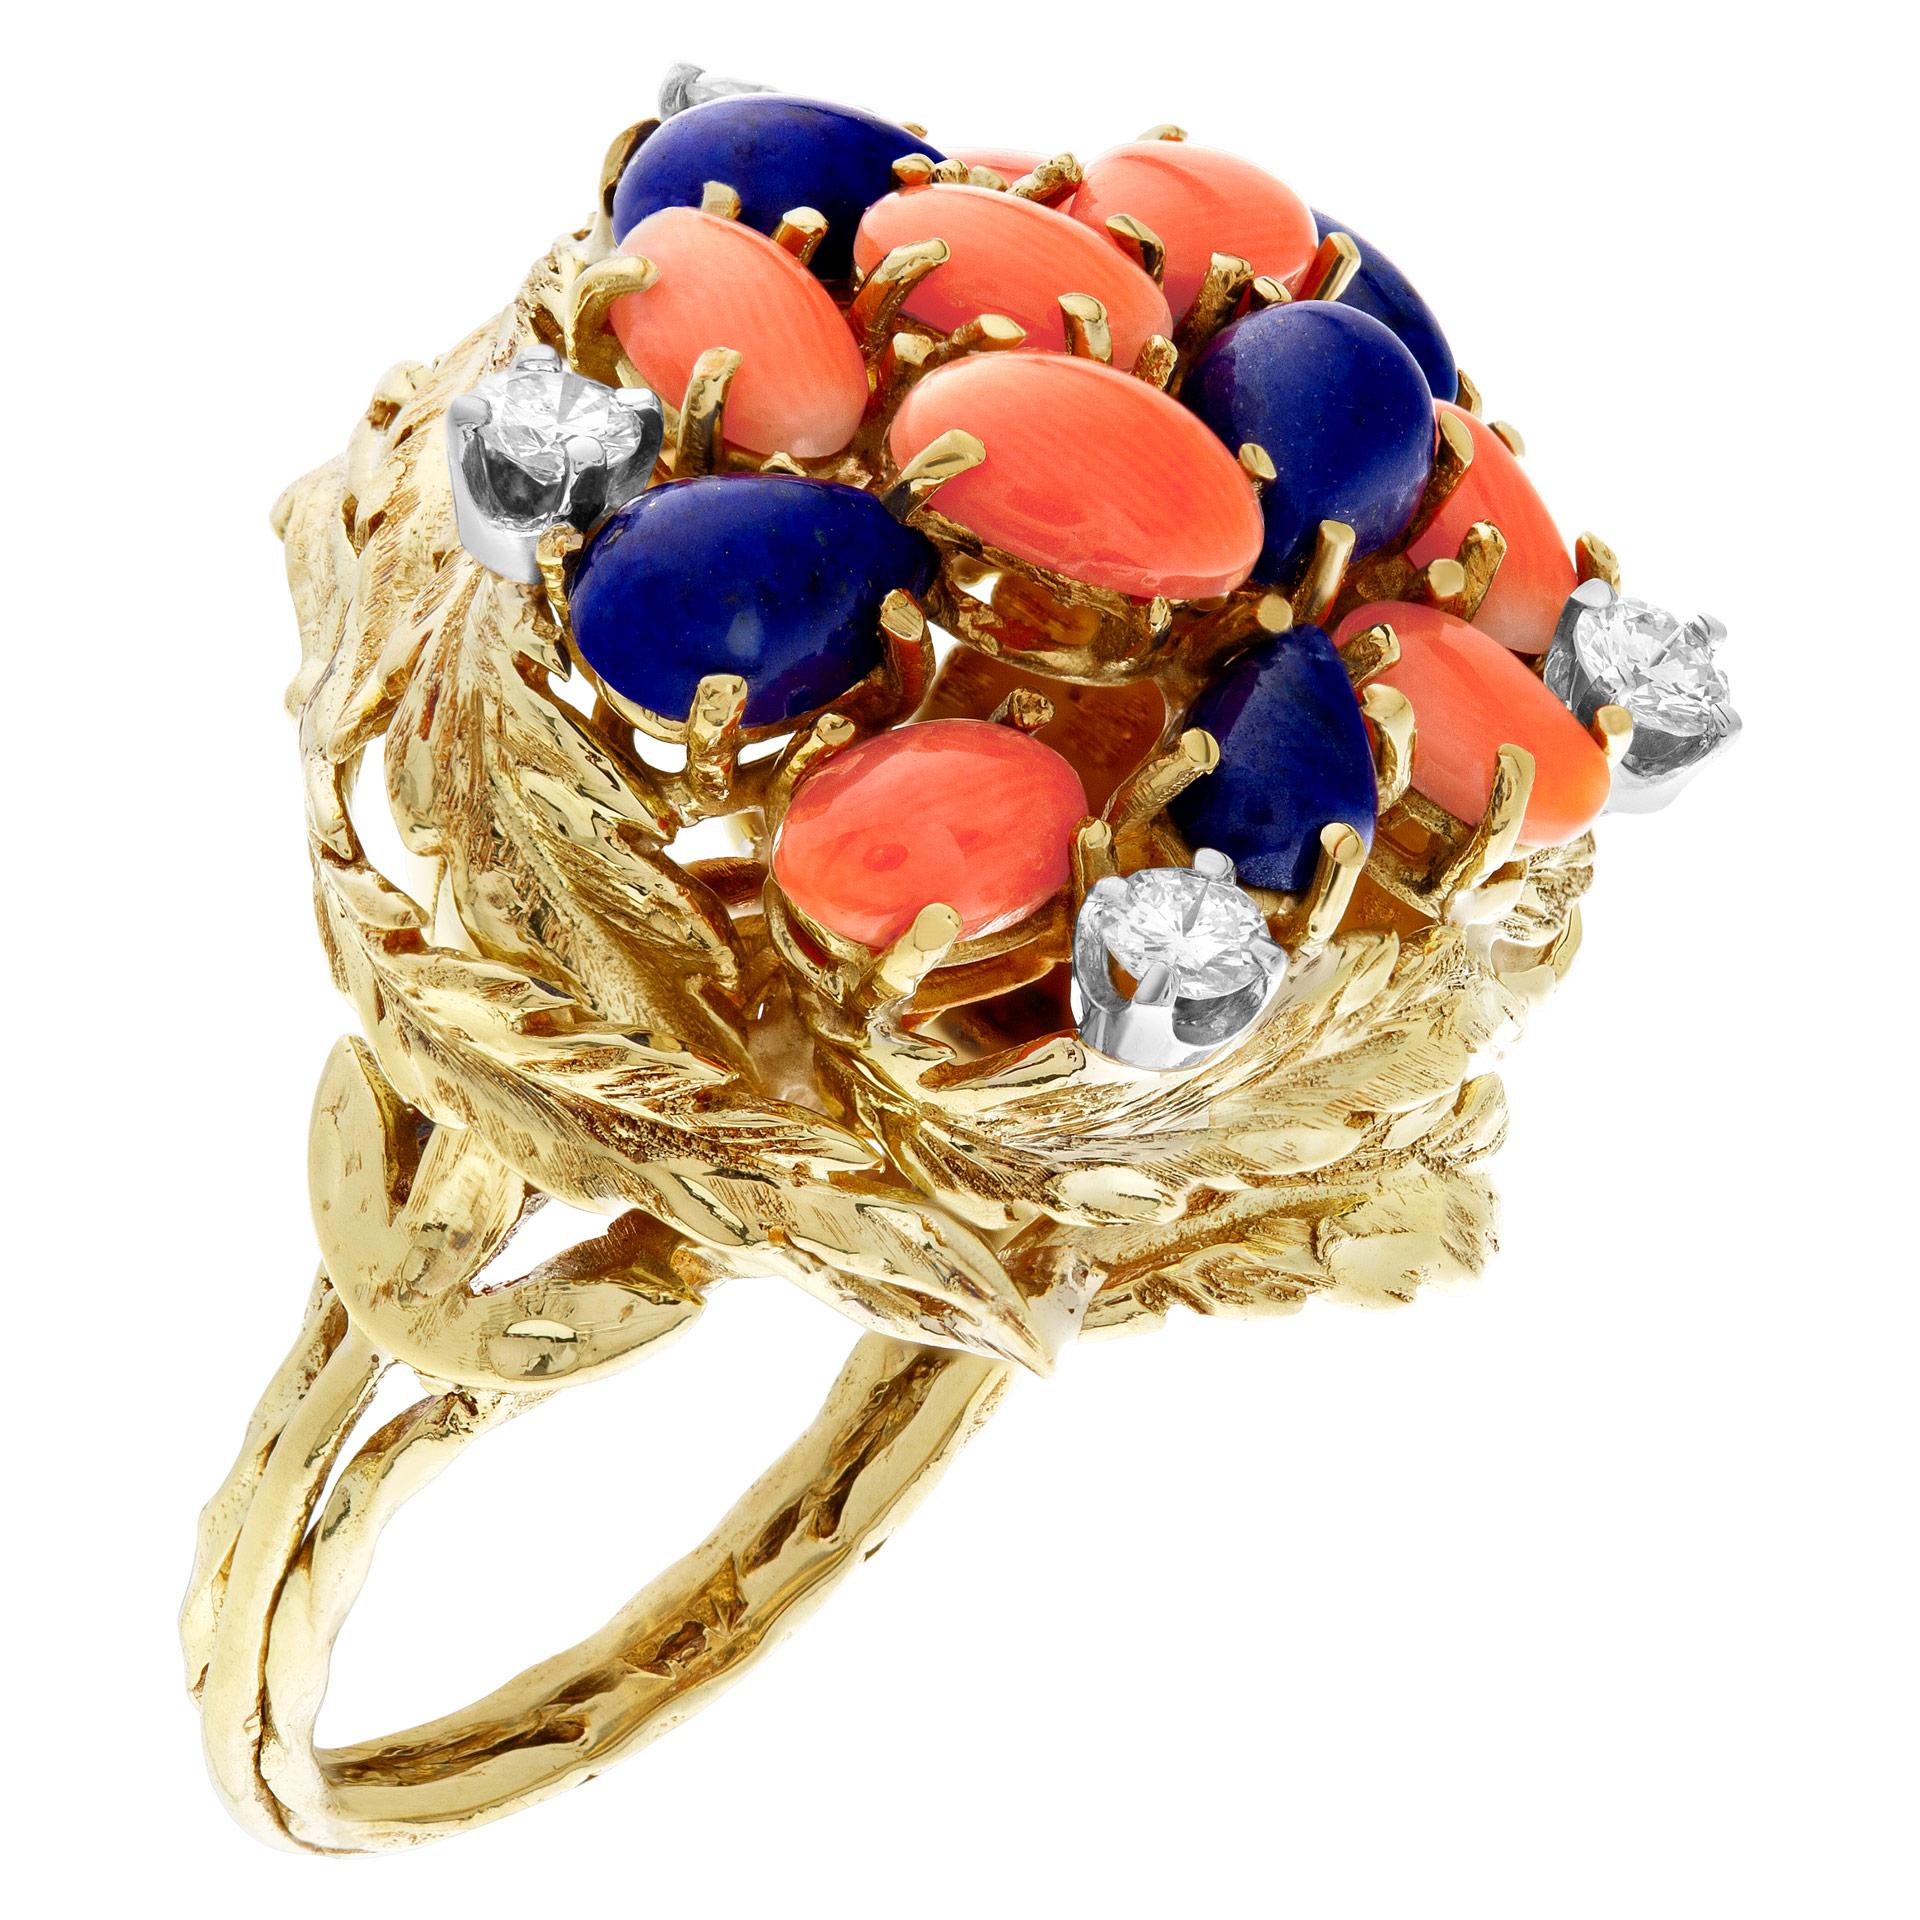 Garden ring in with lapis lazuli & coral cabochons in 18k yellow gold with 0.50 carats in diamond accents. Size 8.This ring is currently size 8 and some items can be sized up or down, please ask! It weighs 14.3 pennyweights and is 18k.
